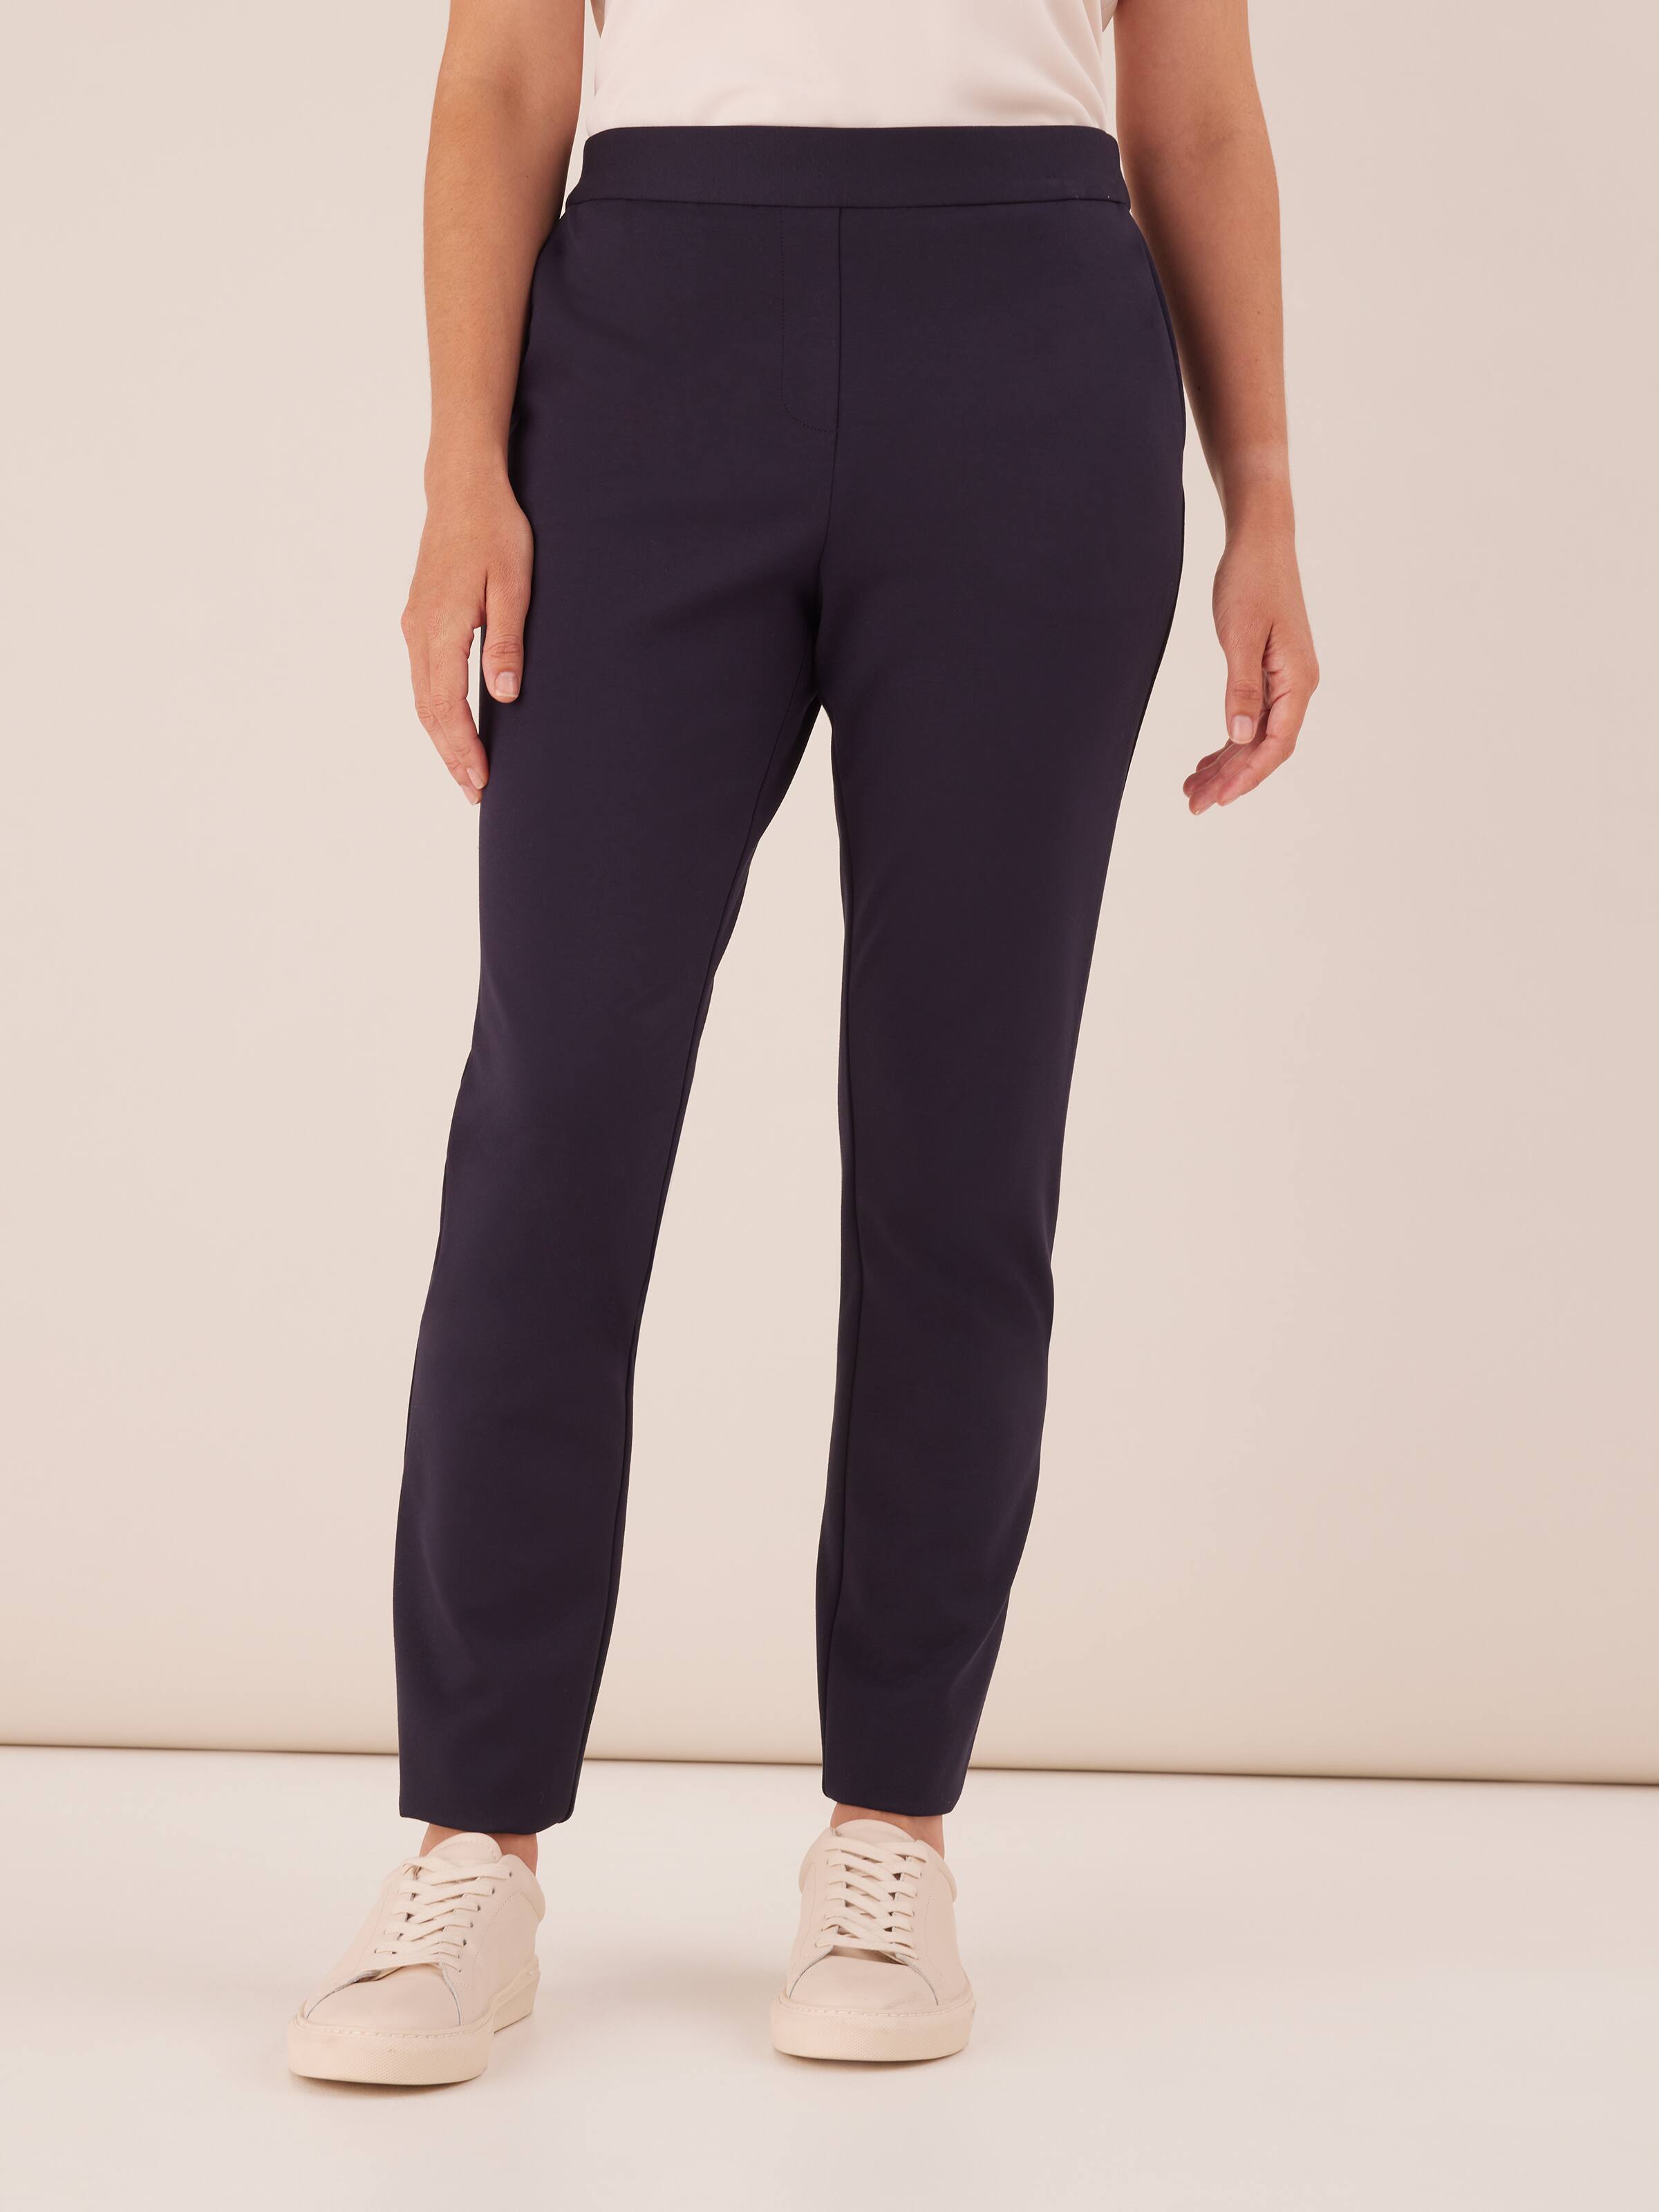 Work Pants For Women - Trousers, Culottes & More